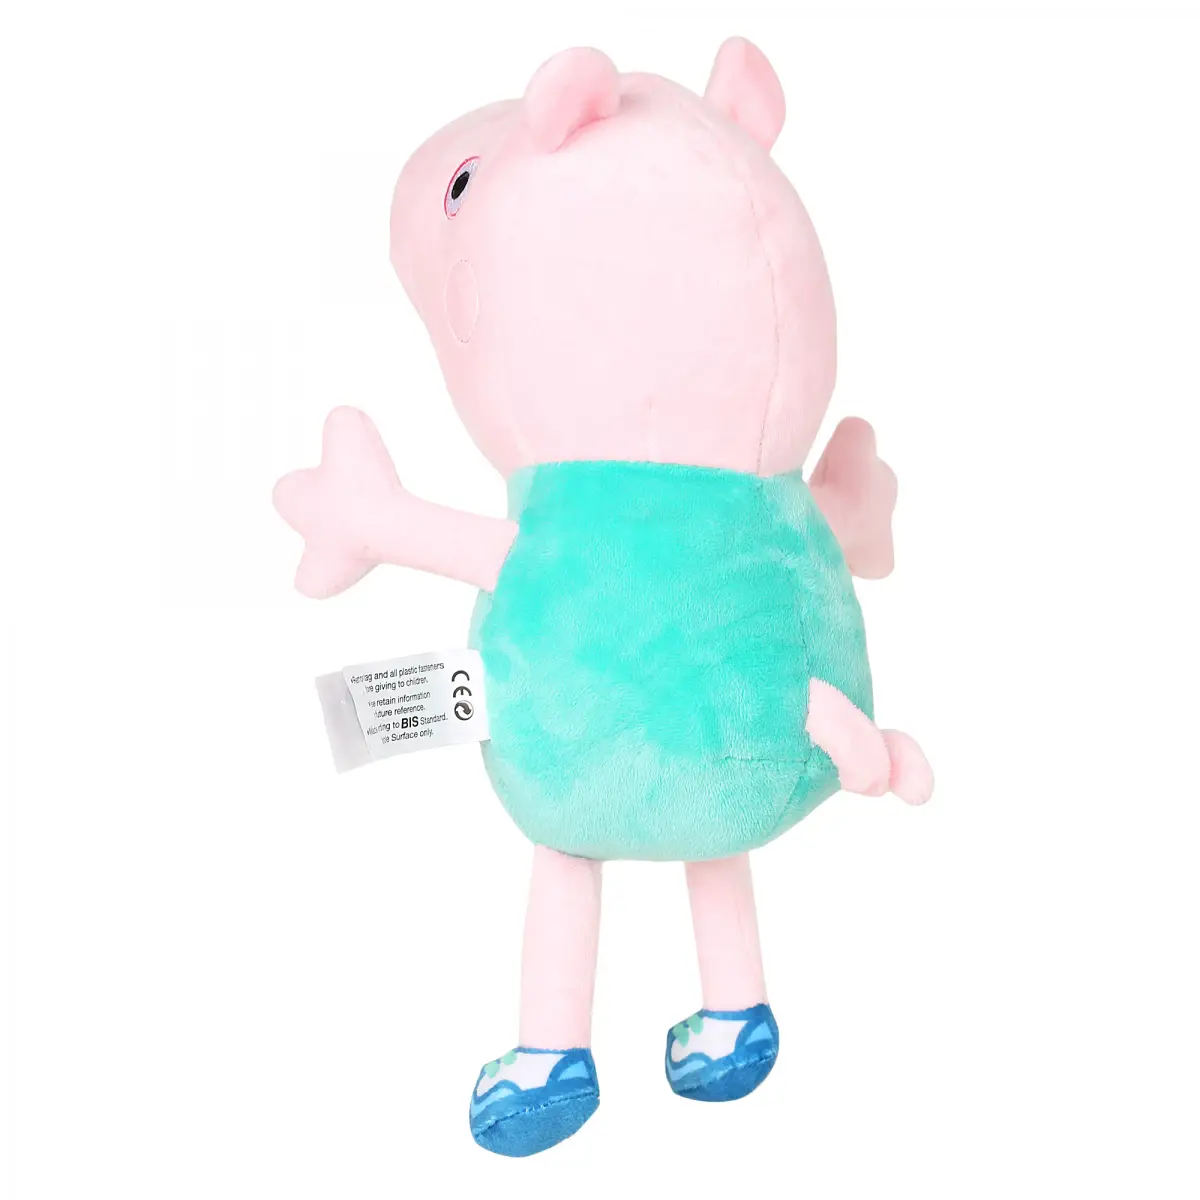 Peppa Pig Green George Soft Toy for Kids, 30cm, 18M+